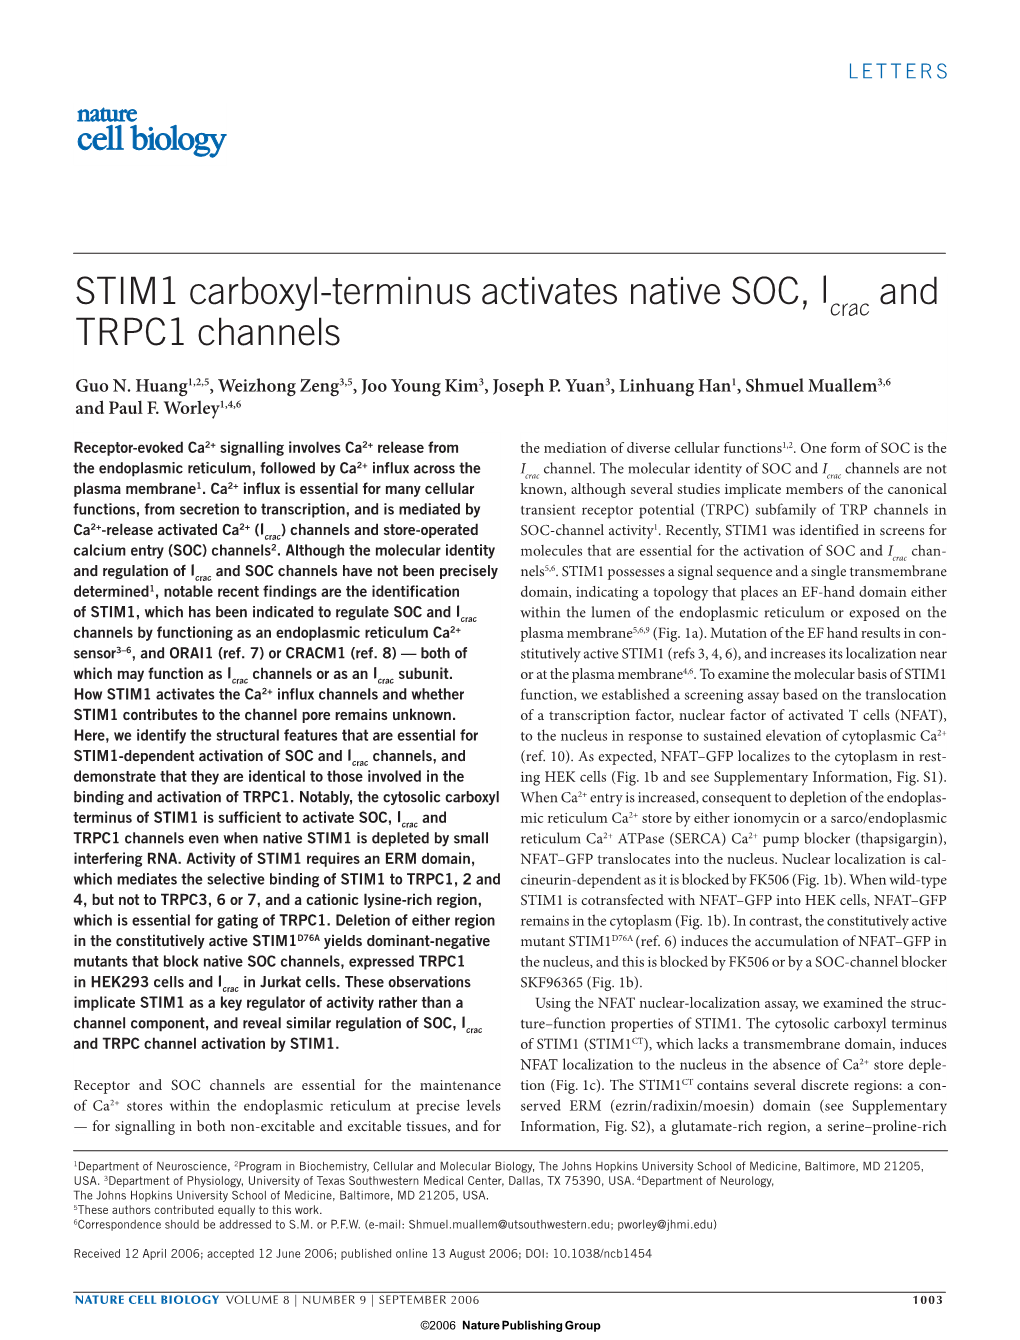 STIM1 Carboxyl-Terminus Activates Native SOC, I and TRPC1 Channels